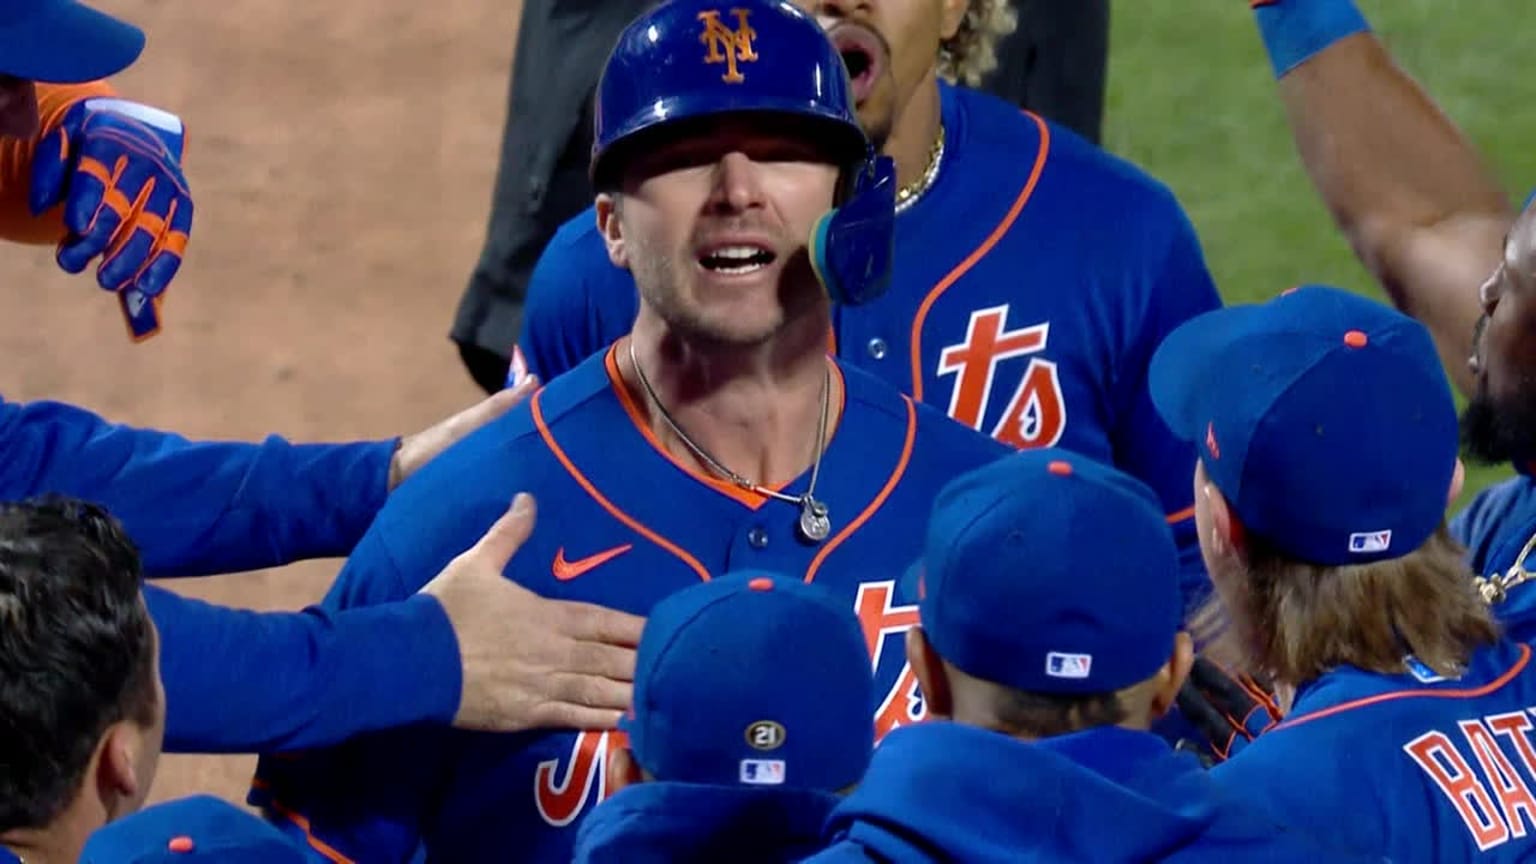 MLB roundup: Pete Alonso's walk-off HR lifts Mets over Cards in 10